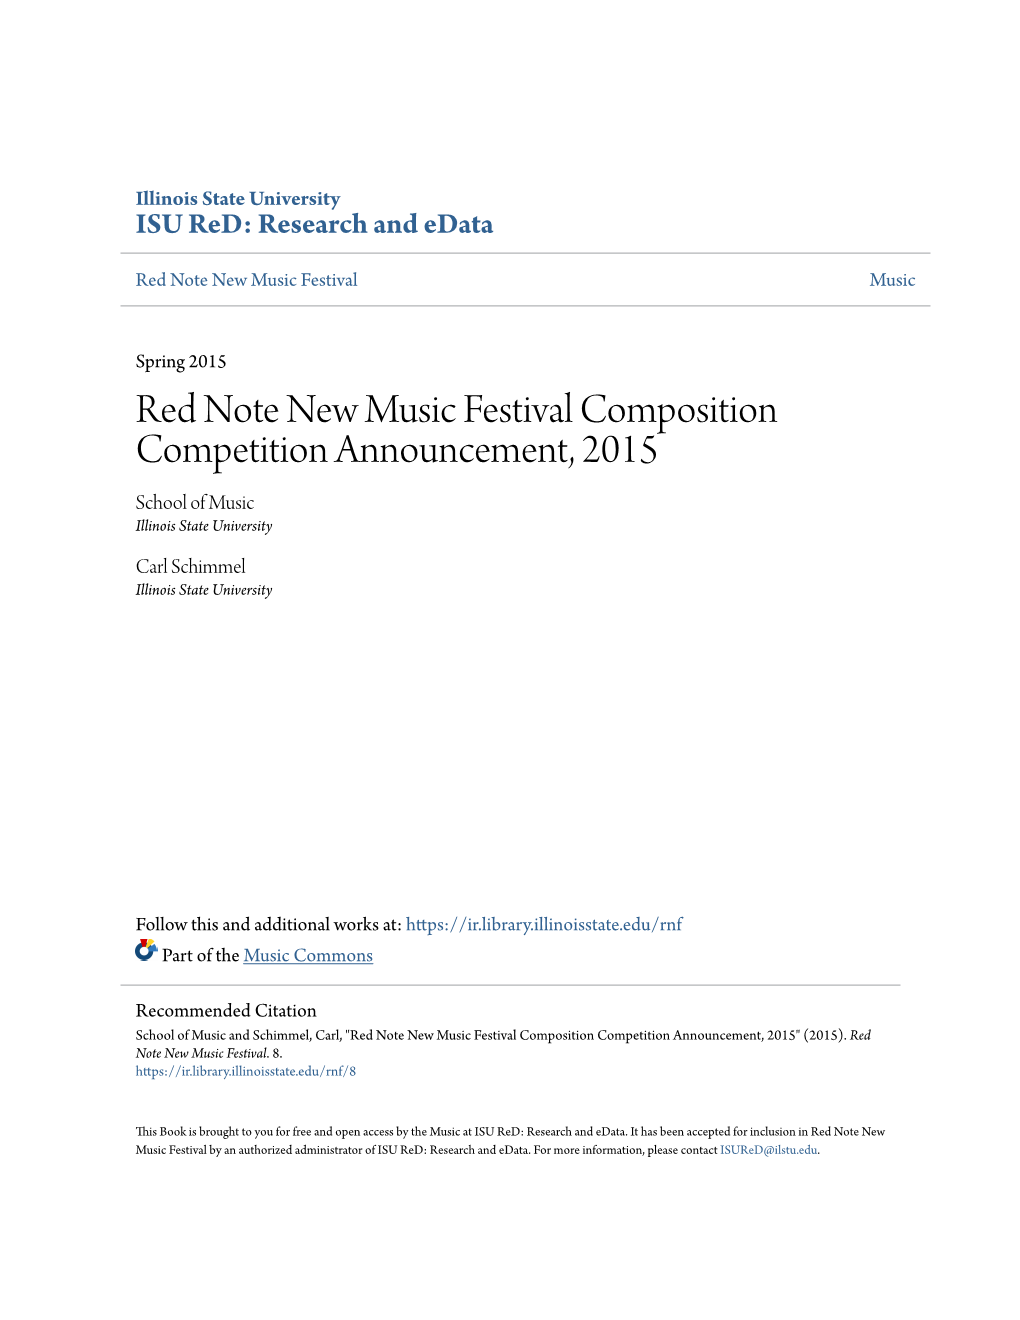 Red Note New Music Festival Composition Competition Announcement, 2015 School of Music Illinois State University